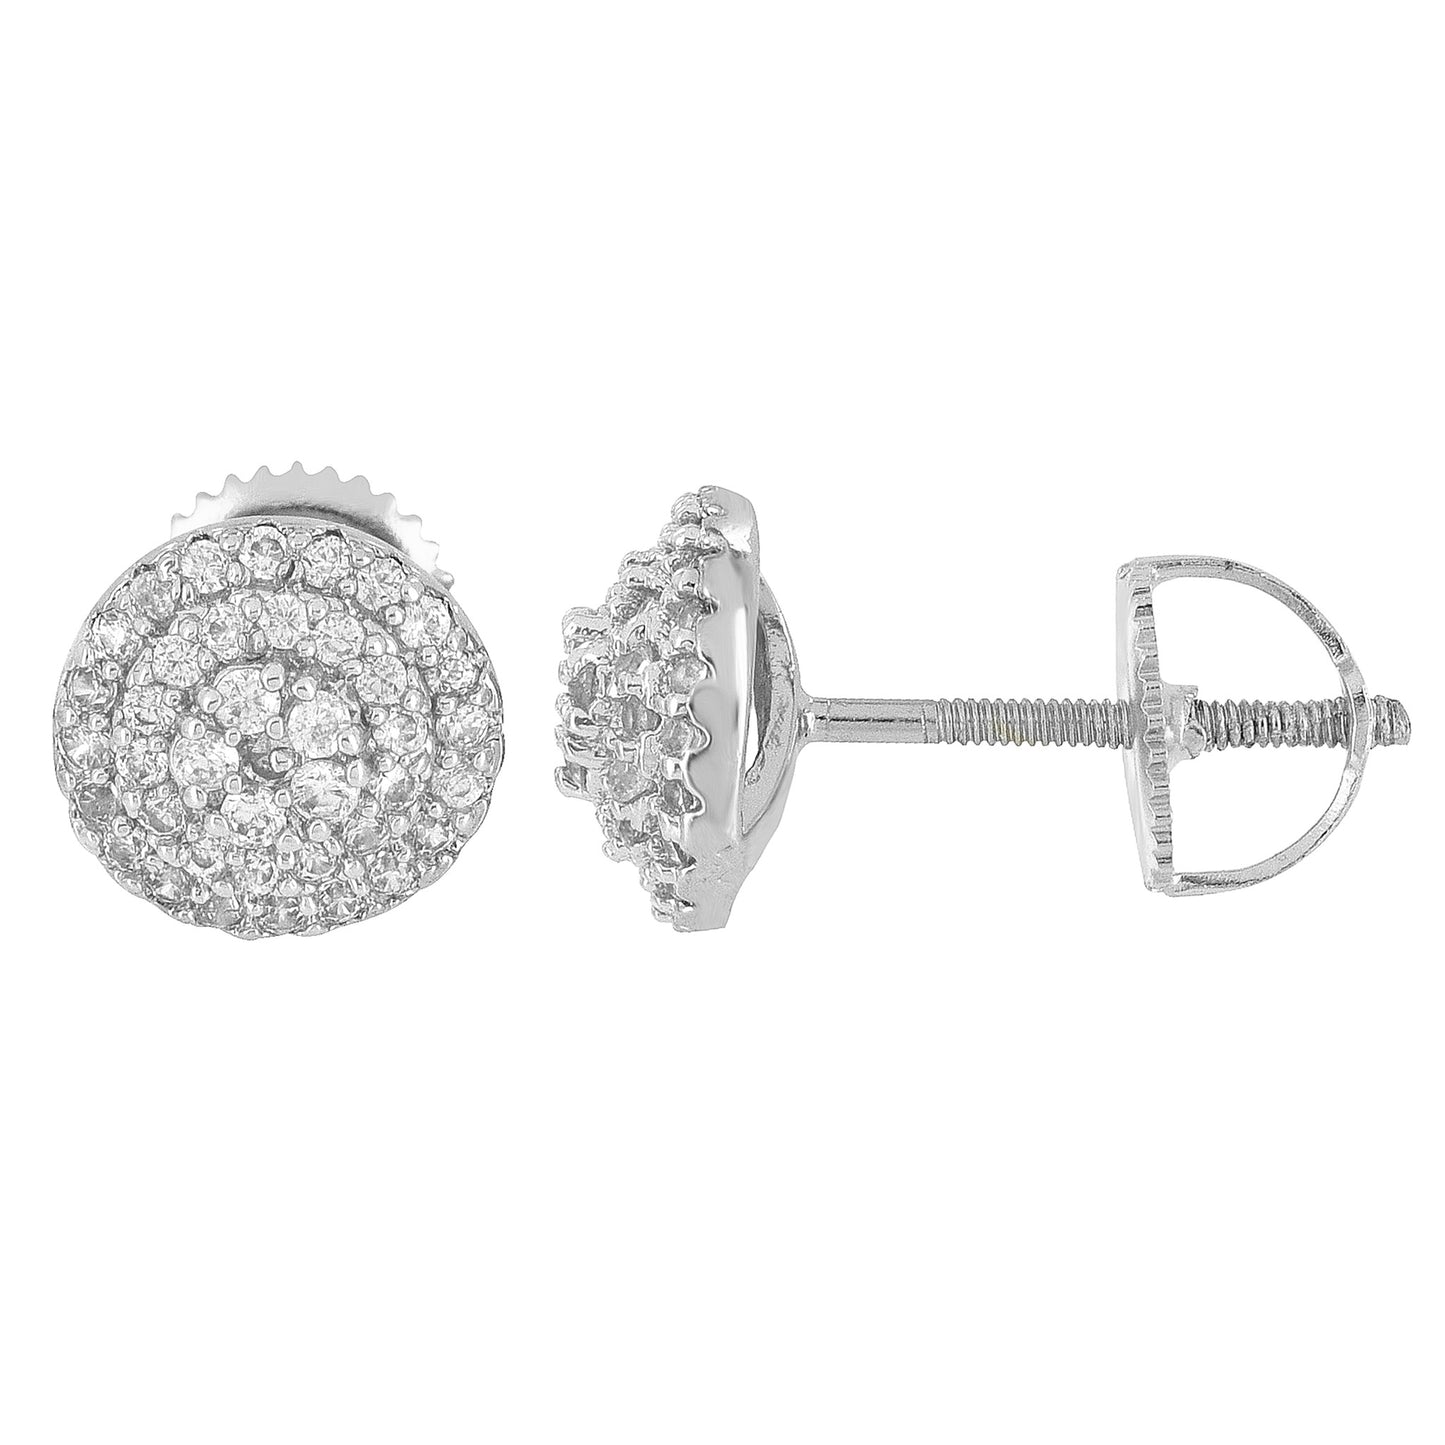 Silver Tone Earrings Round Prong Set Bling Simulated Diamonds